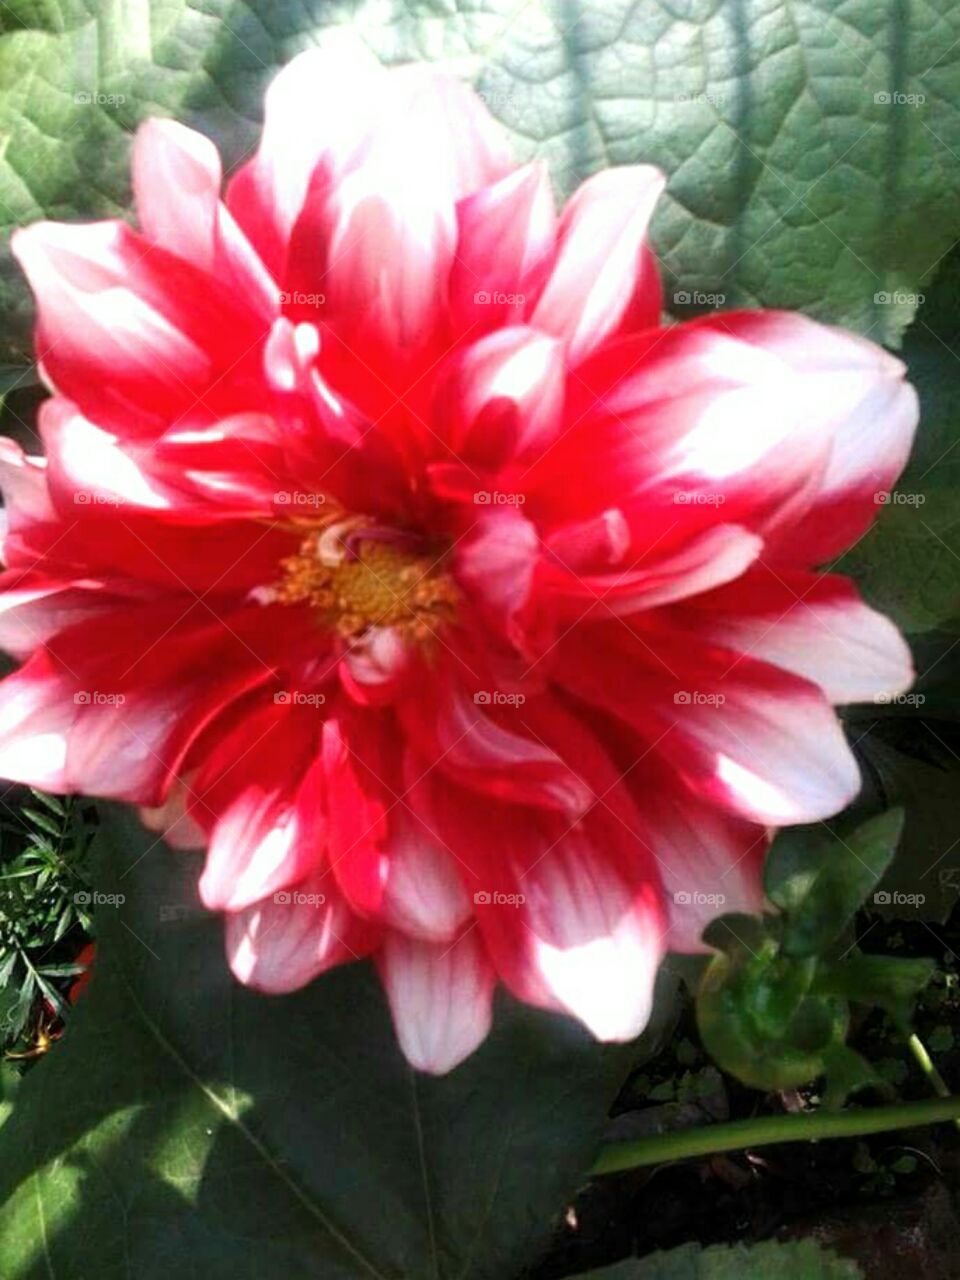 Dahlia (Dahlia) is the sunflower total, the quince of the two-part class is a very beautiful plant. It is almost similar to the pulp in beauty. It is actually a resident of Mexico and Central America. It has spread everywhere in the world from there.